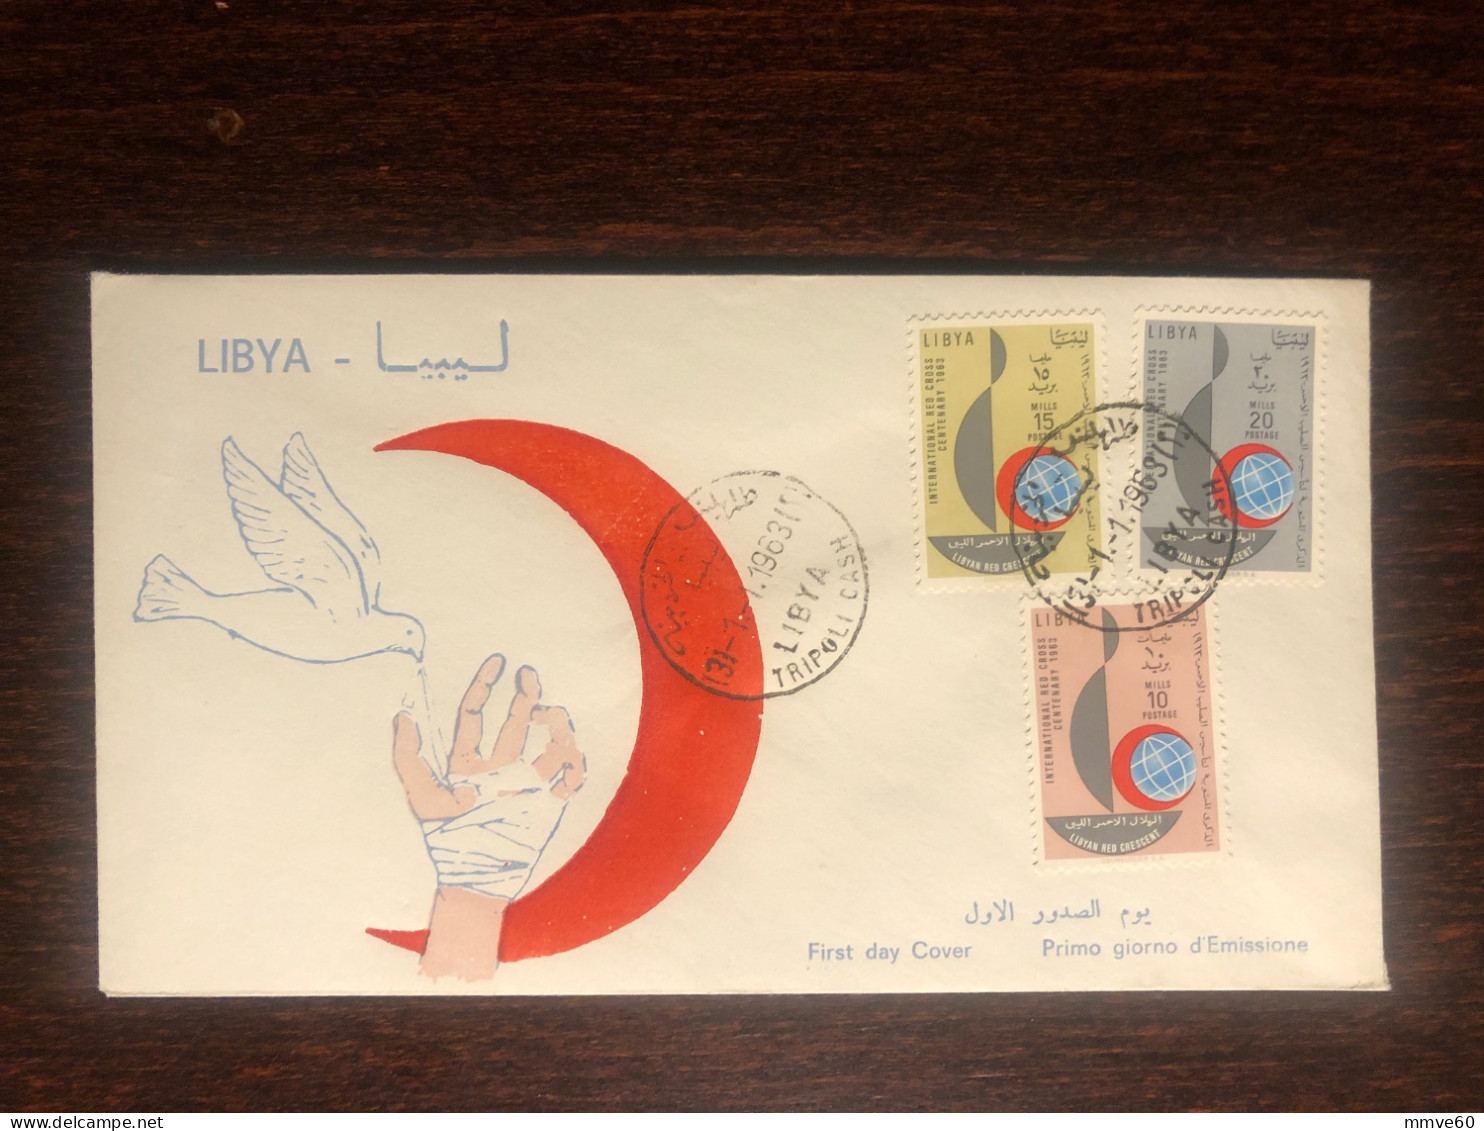 LIBYA  FDC COVER 1963 YEAR RED CRESCENT RED CROSS HEALTH MEDICINE STAMPS - Libye